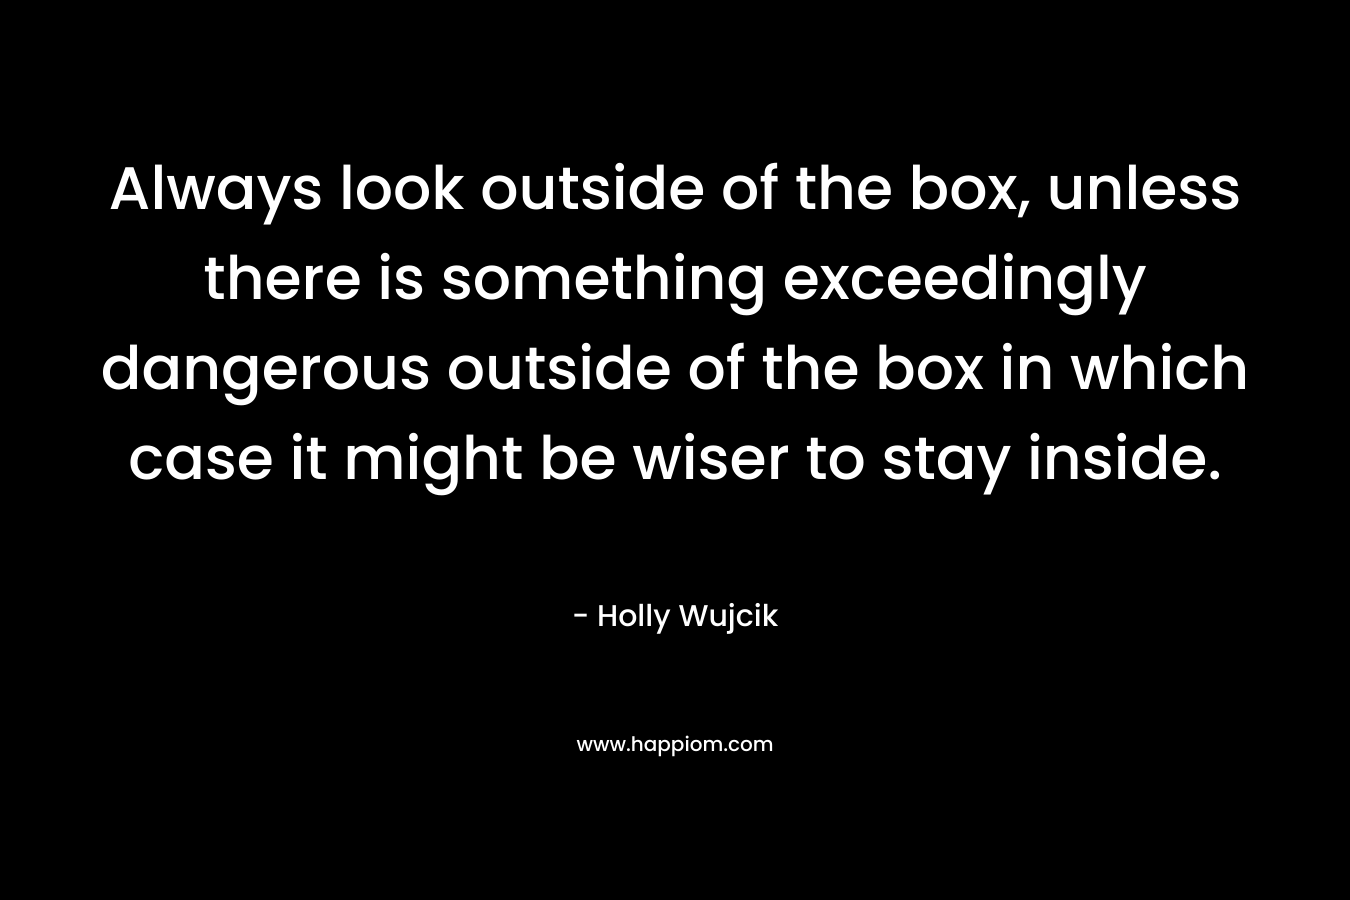 Always look outside of the box, unless there is something exceedingly dangerous outside of the box in which case it might be wiser to stay inside. – Holly Wujcik